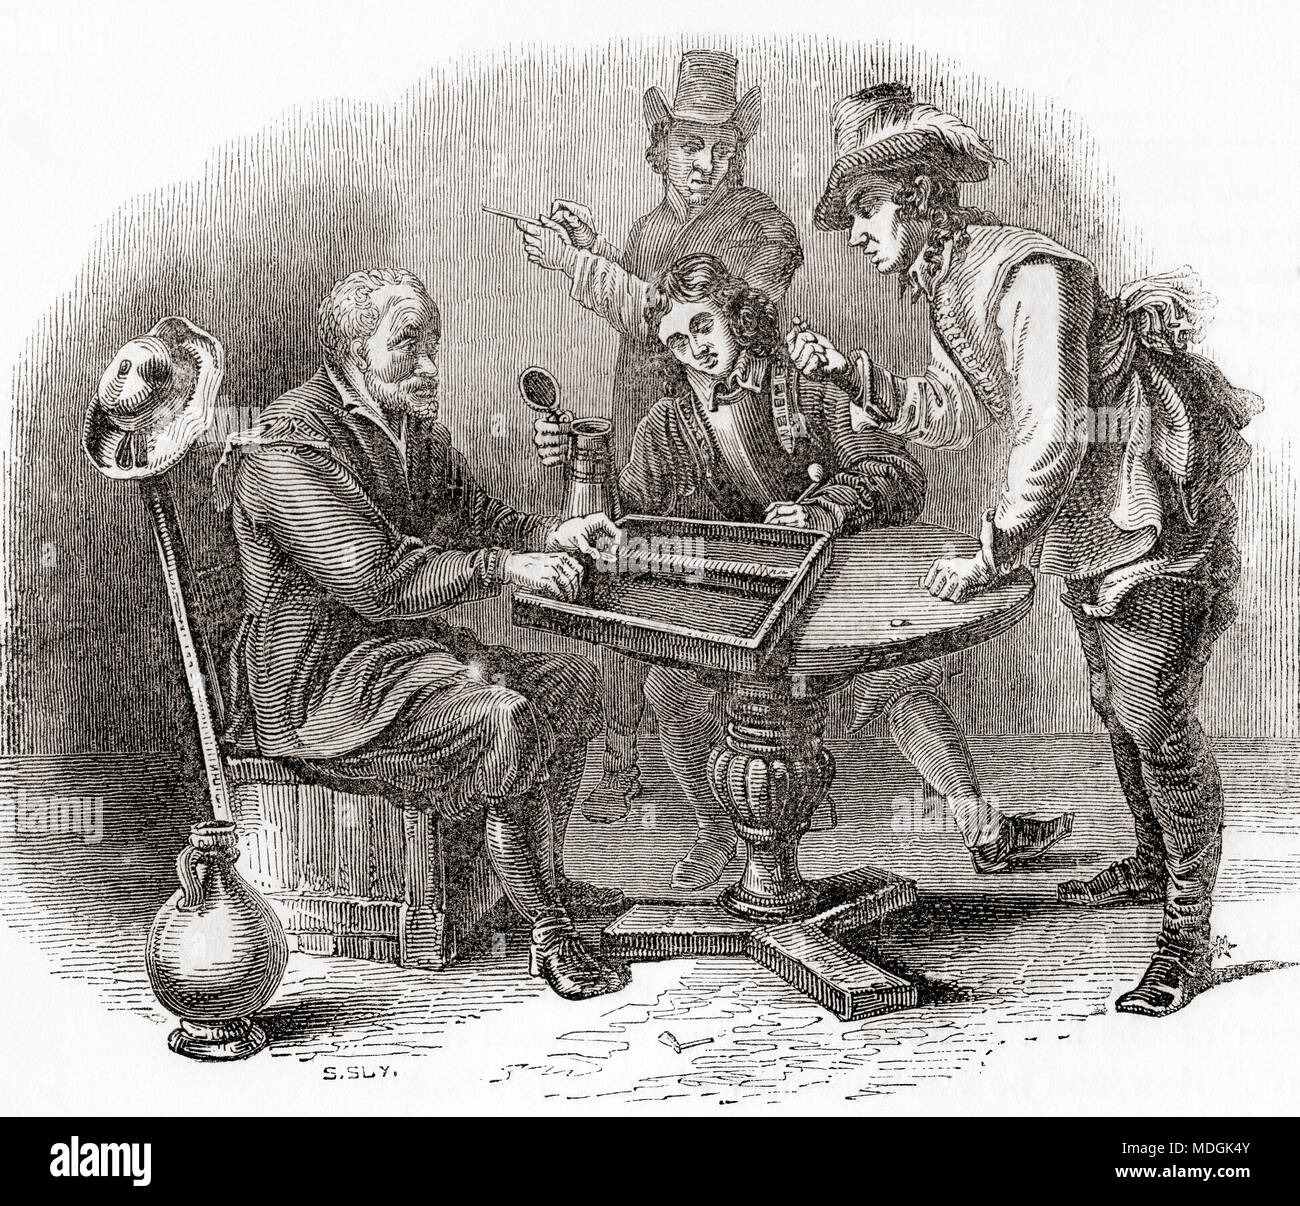 Men playing a game of Tric Trac, aka Tables, an early French form of backgammon.  From Old England: A Pictorial Museum, published 1847. Stock Photo